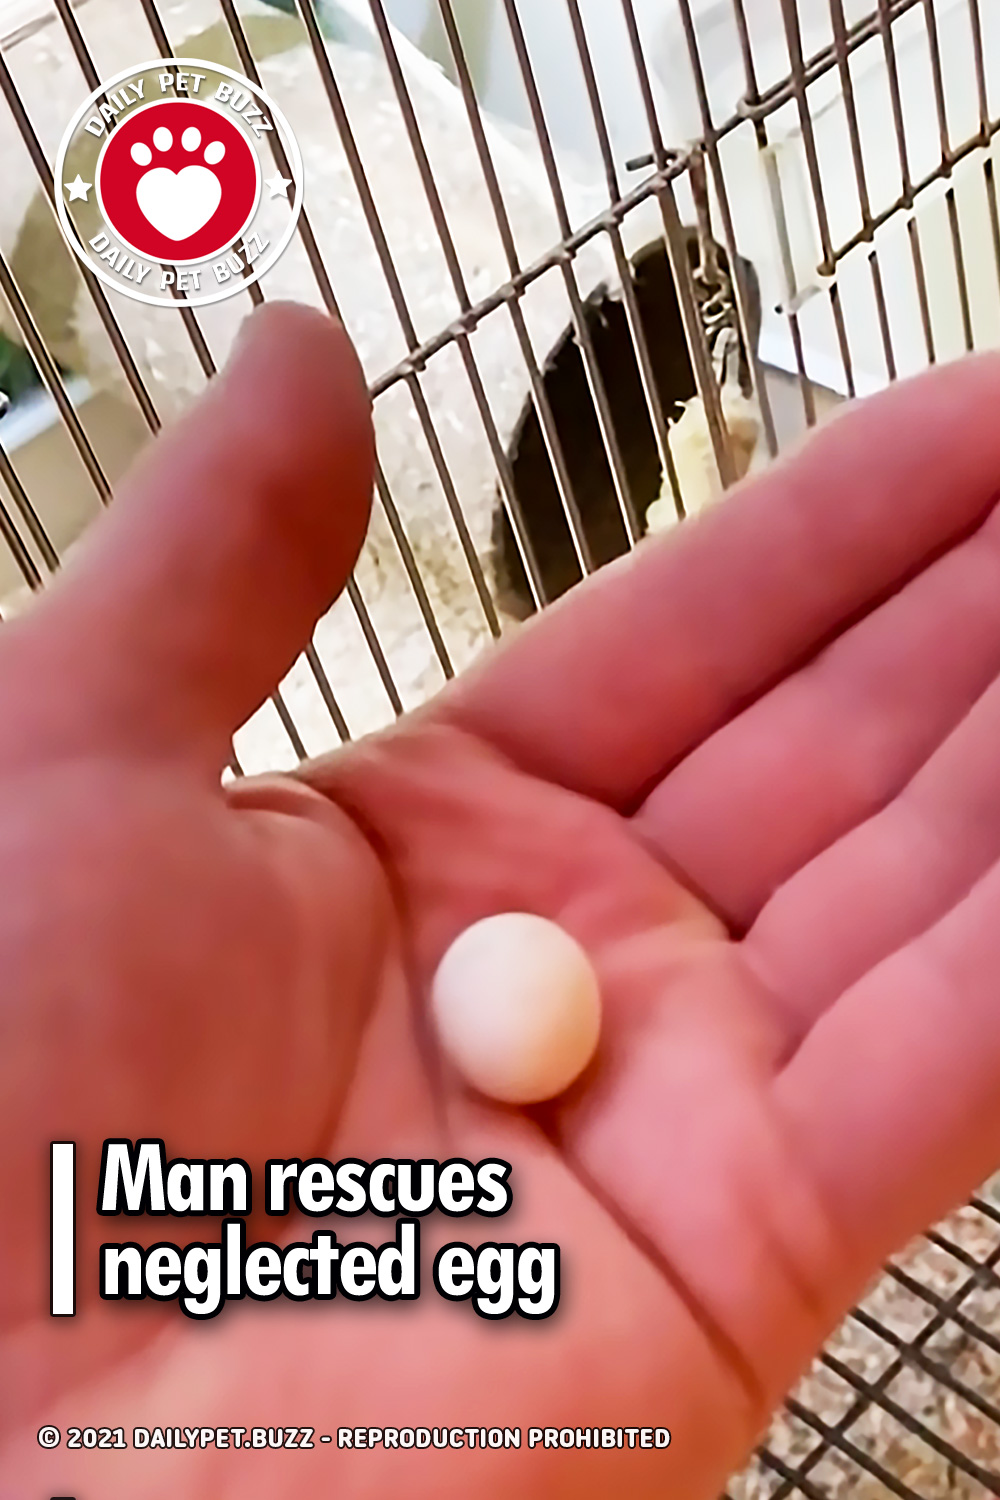 Man rescues neglected egg